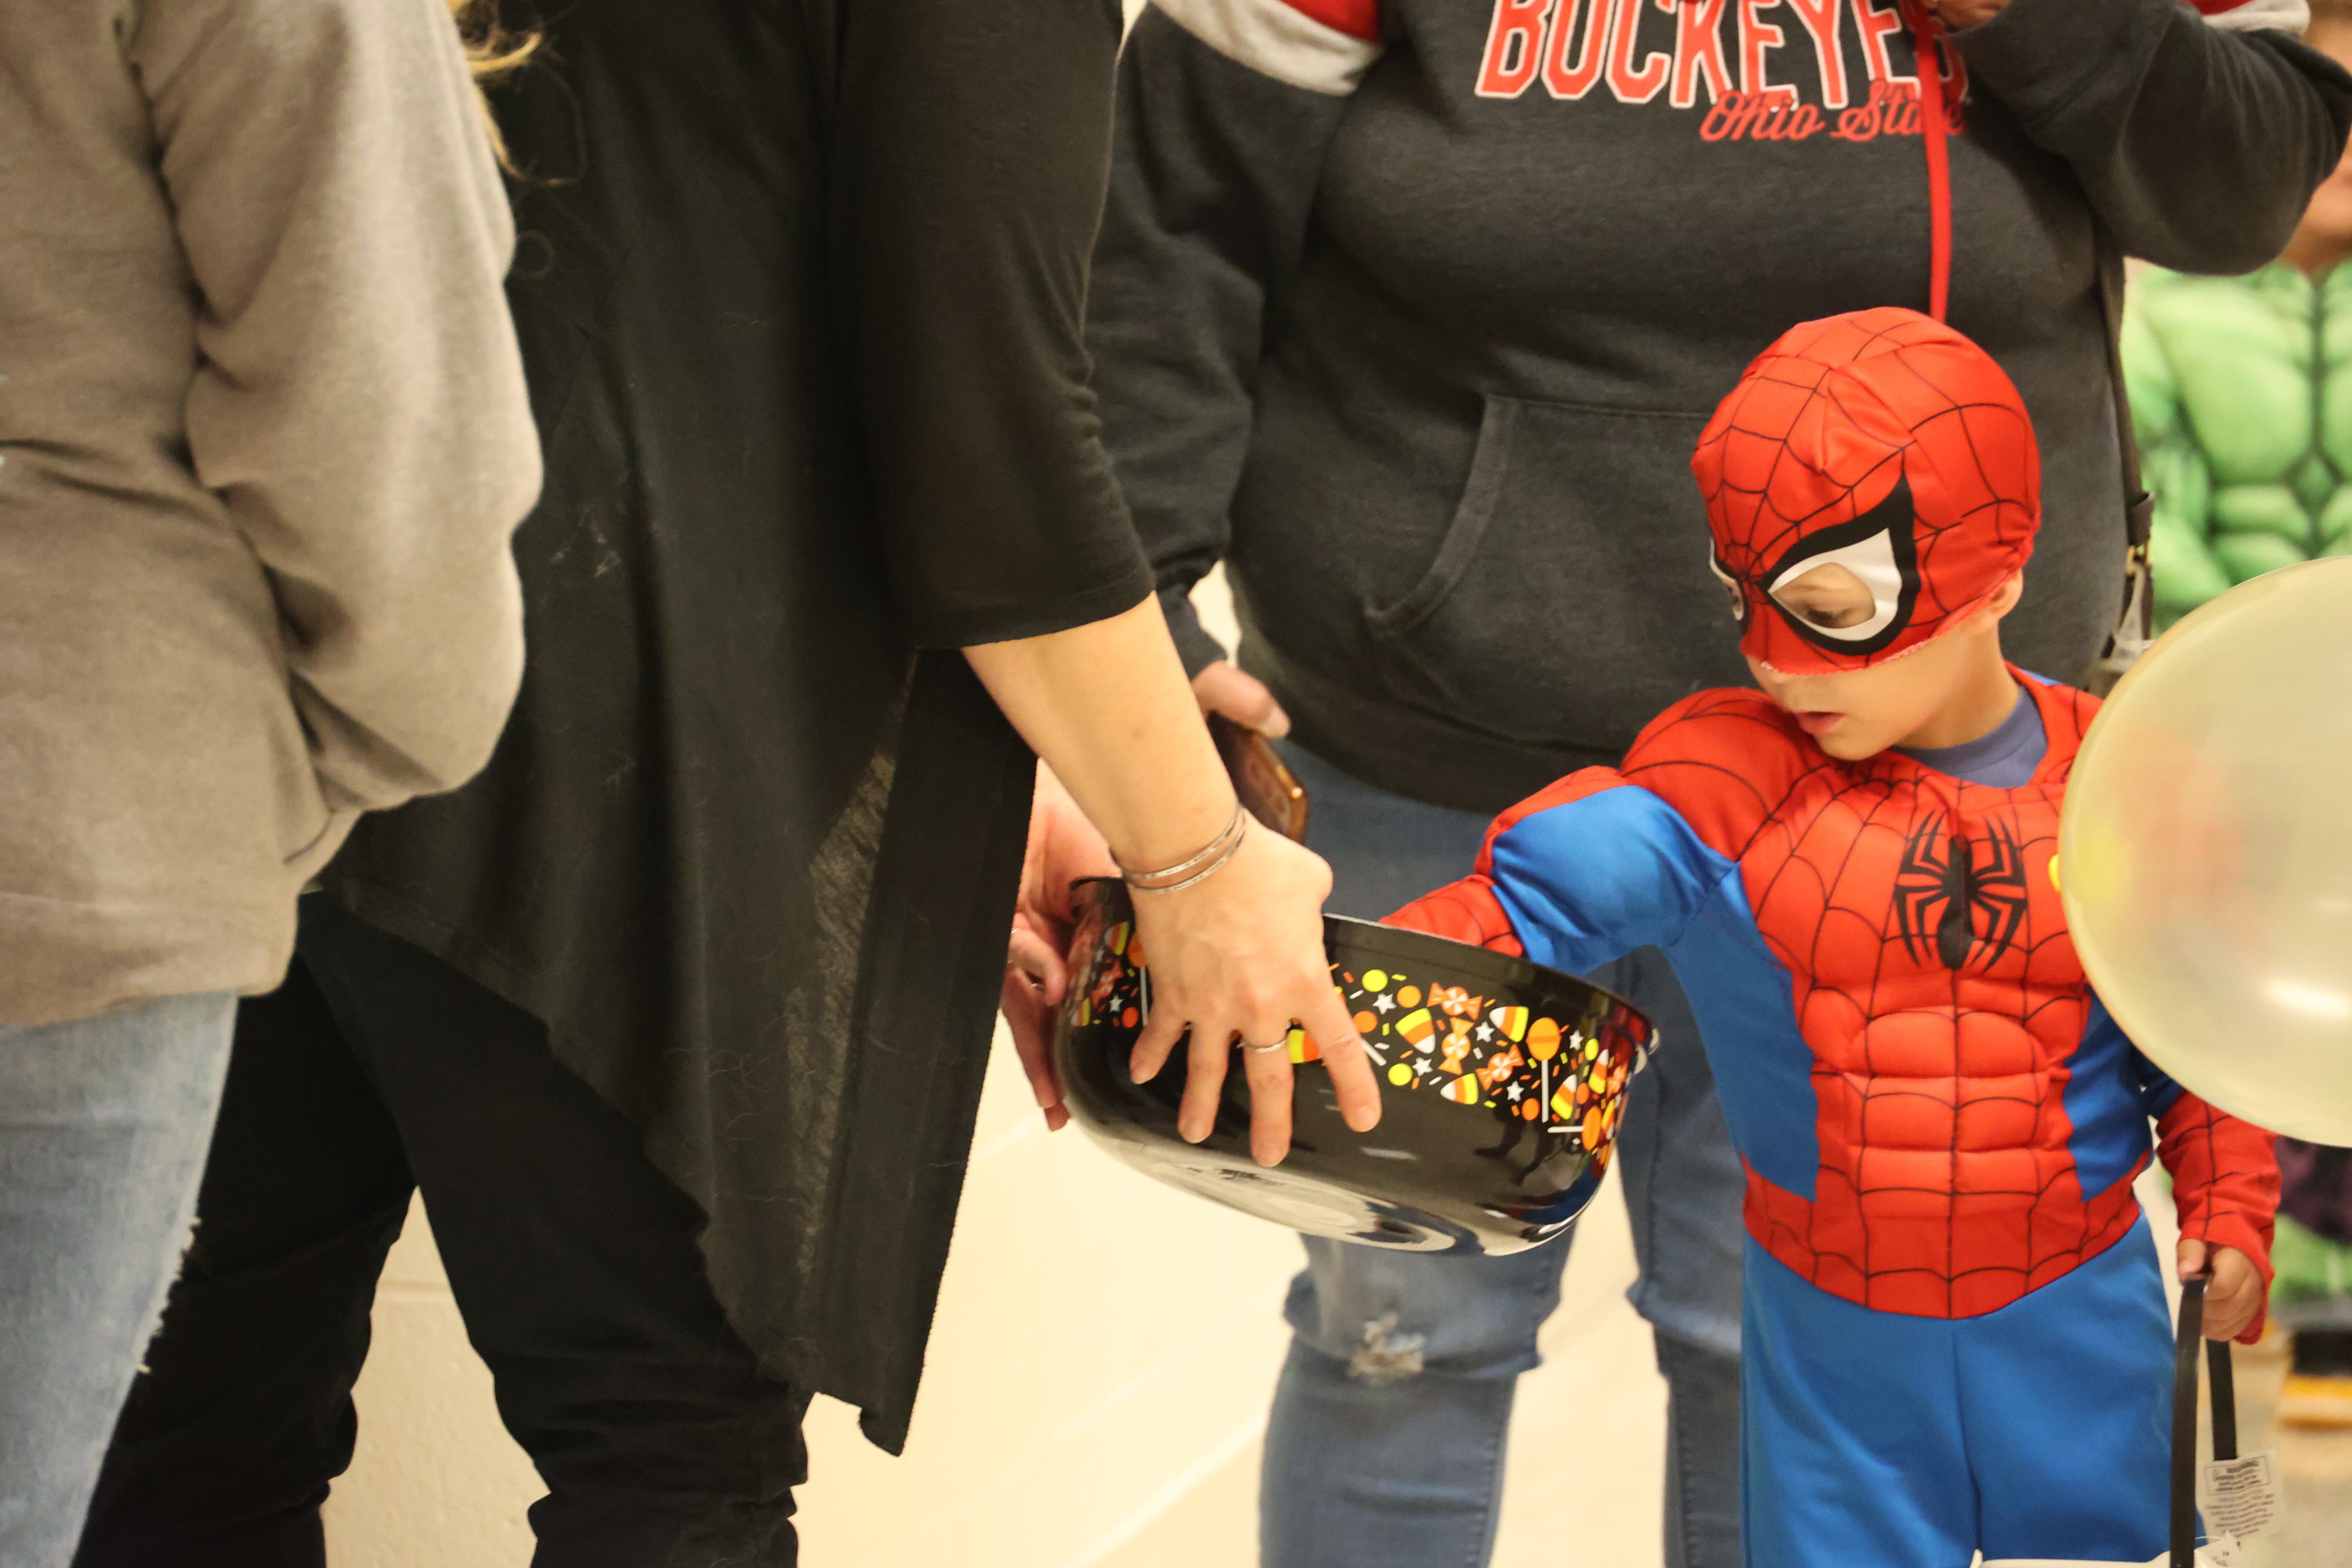 A child dressed as Spiderman reaches for candy.